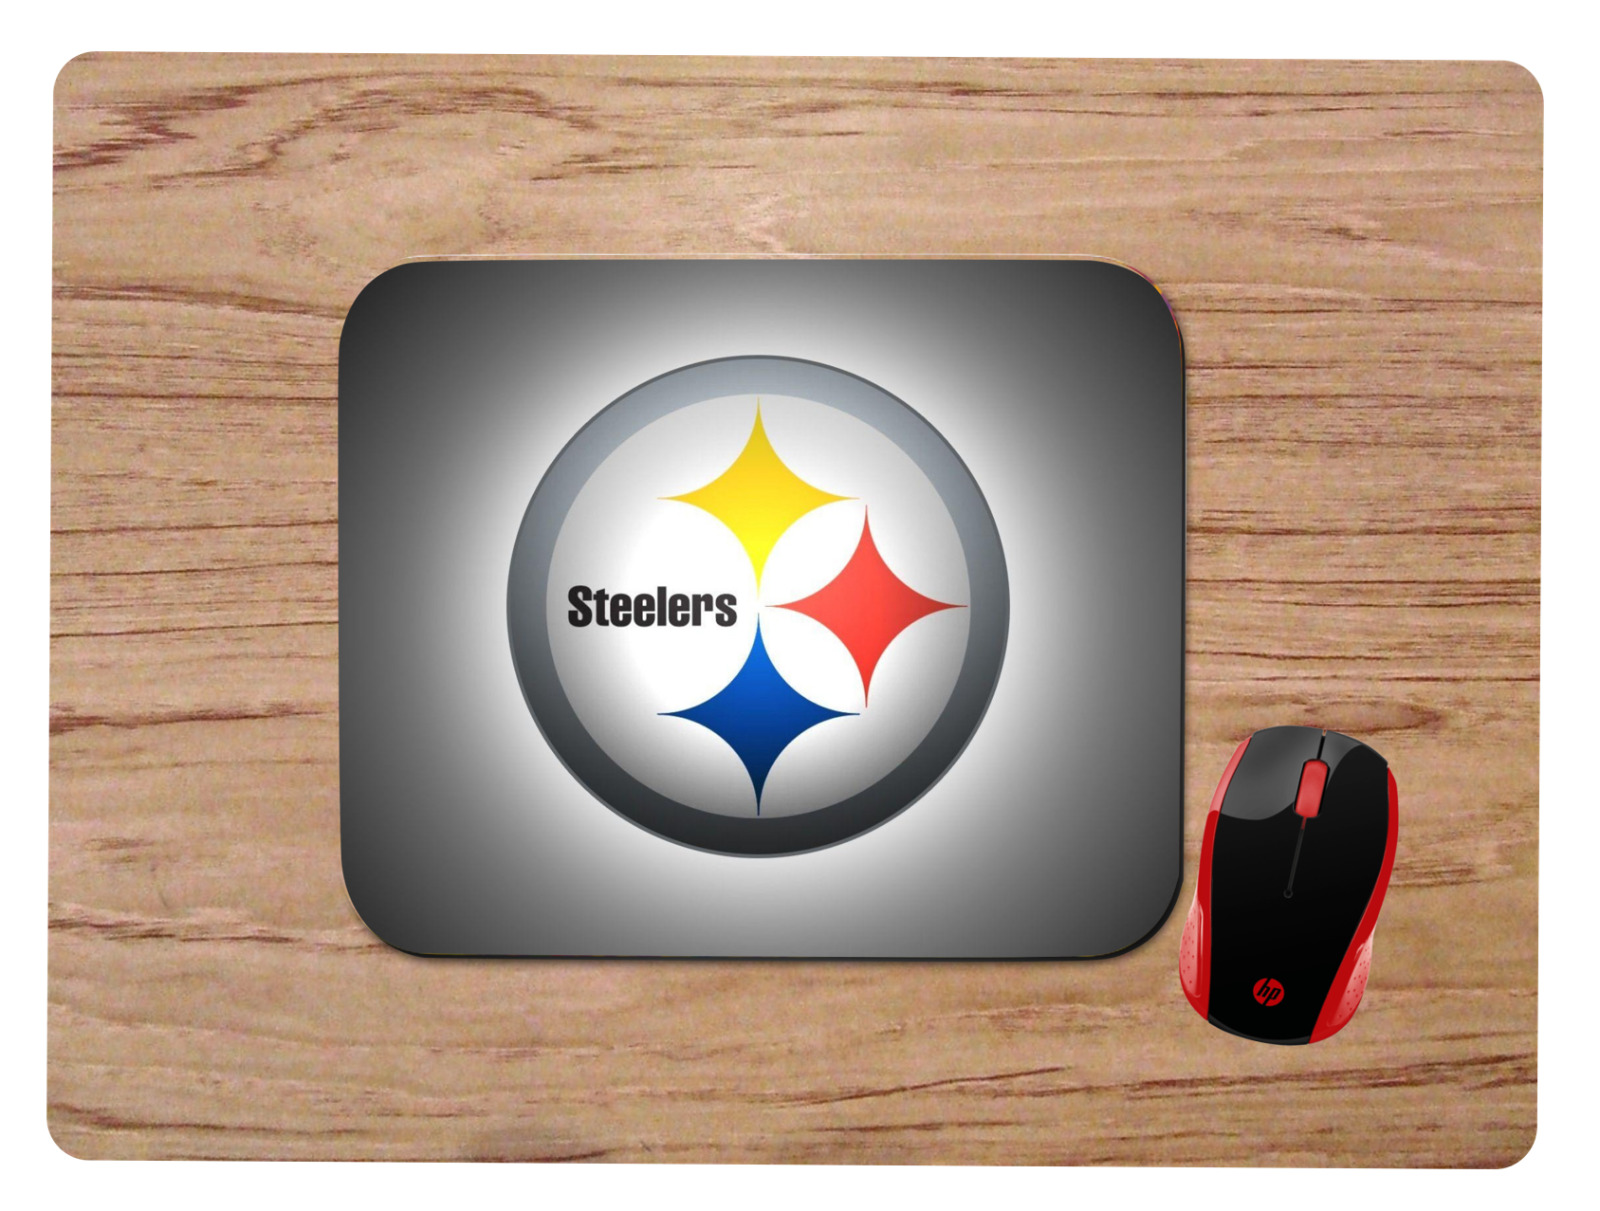 PITTSBURGH STEELERS DESIGN MOUSEPAD MOUSE PAD HOME OFFICE GIFT NFL 